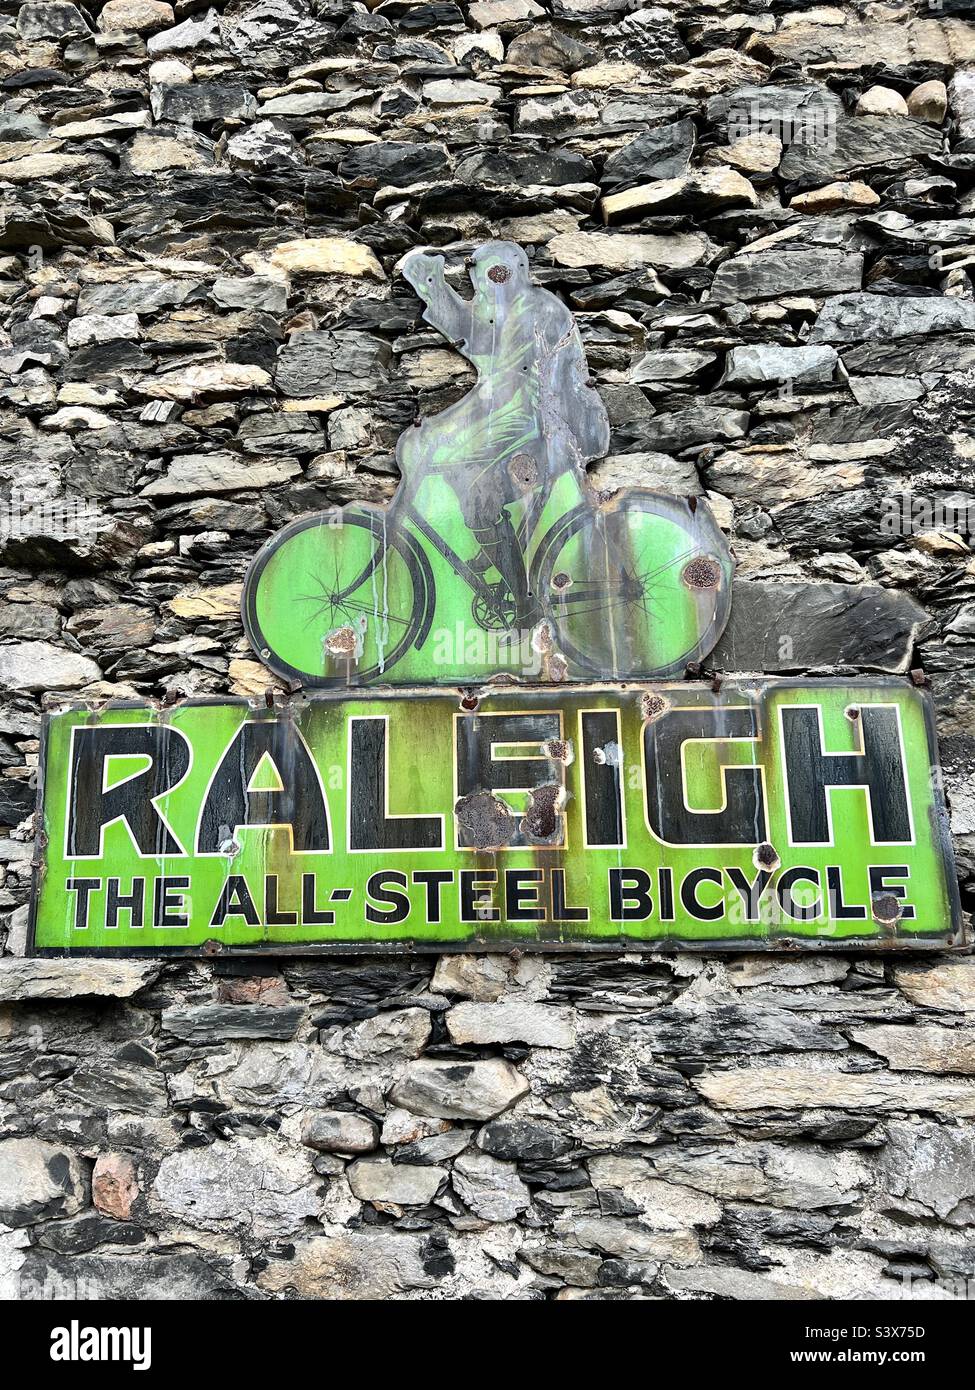 Old metal sign advertising Raleigh bicycles Stock Photo